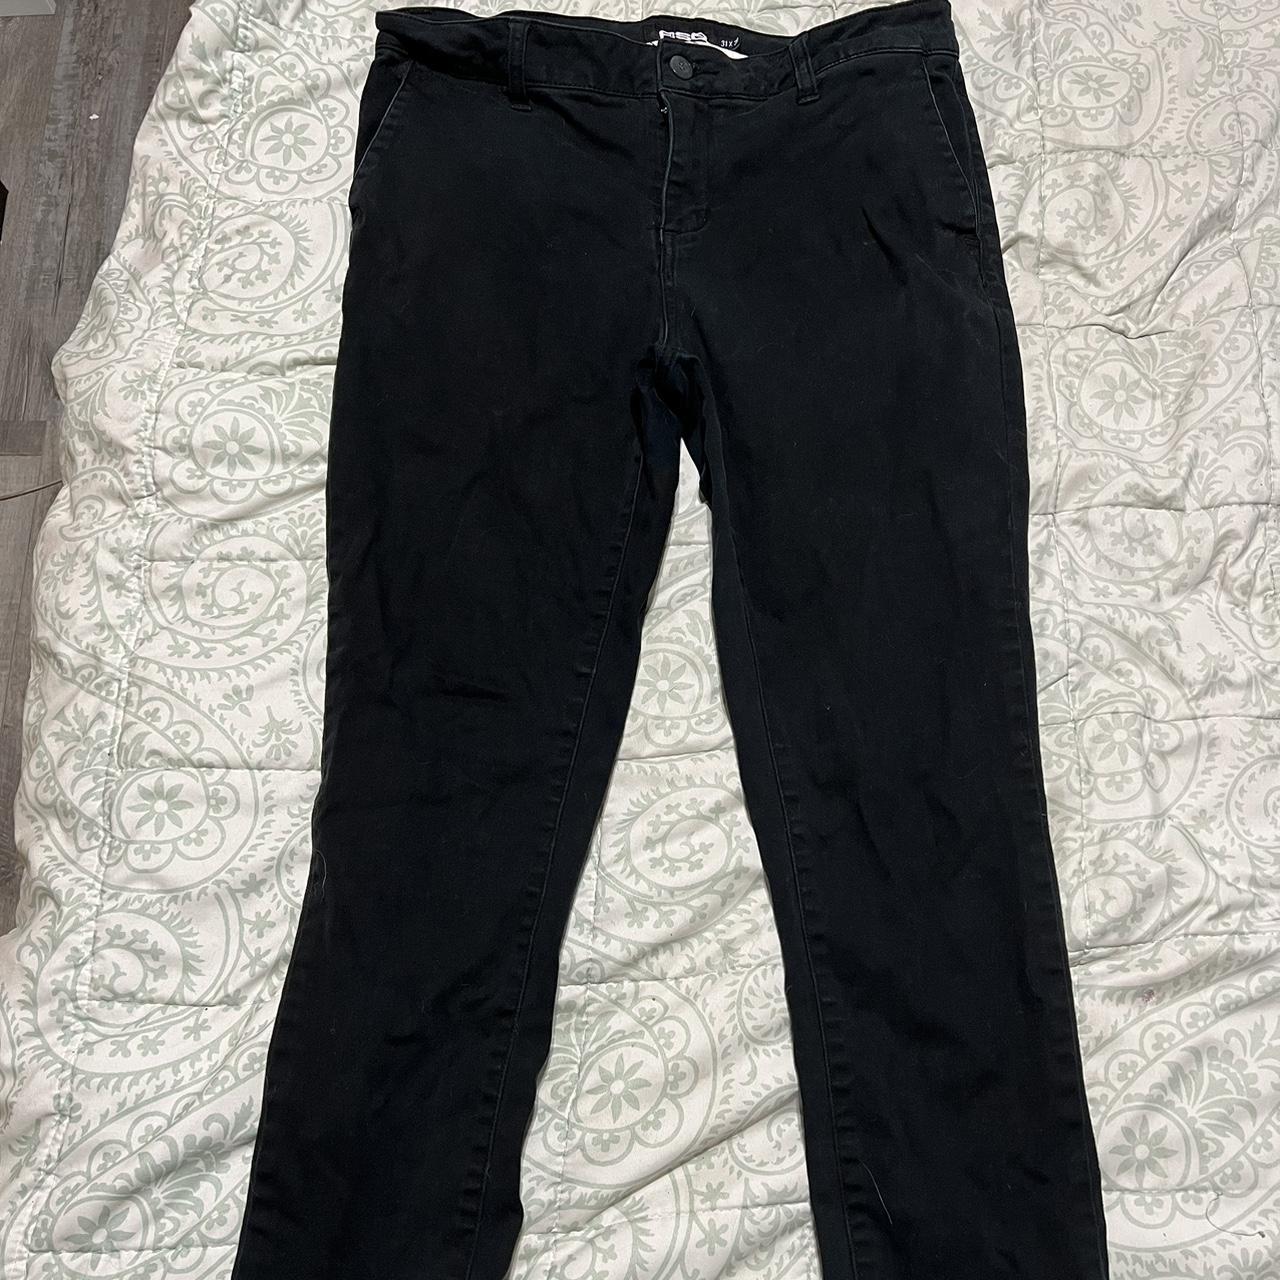 RSQ pants from Tilly's, they're 31x30, worn often, - Depop